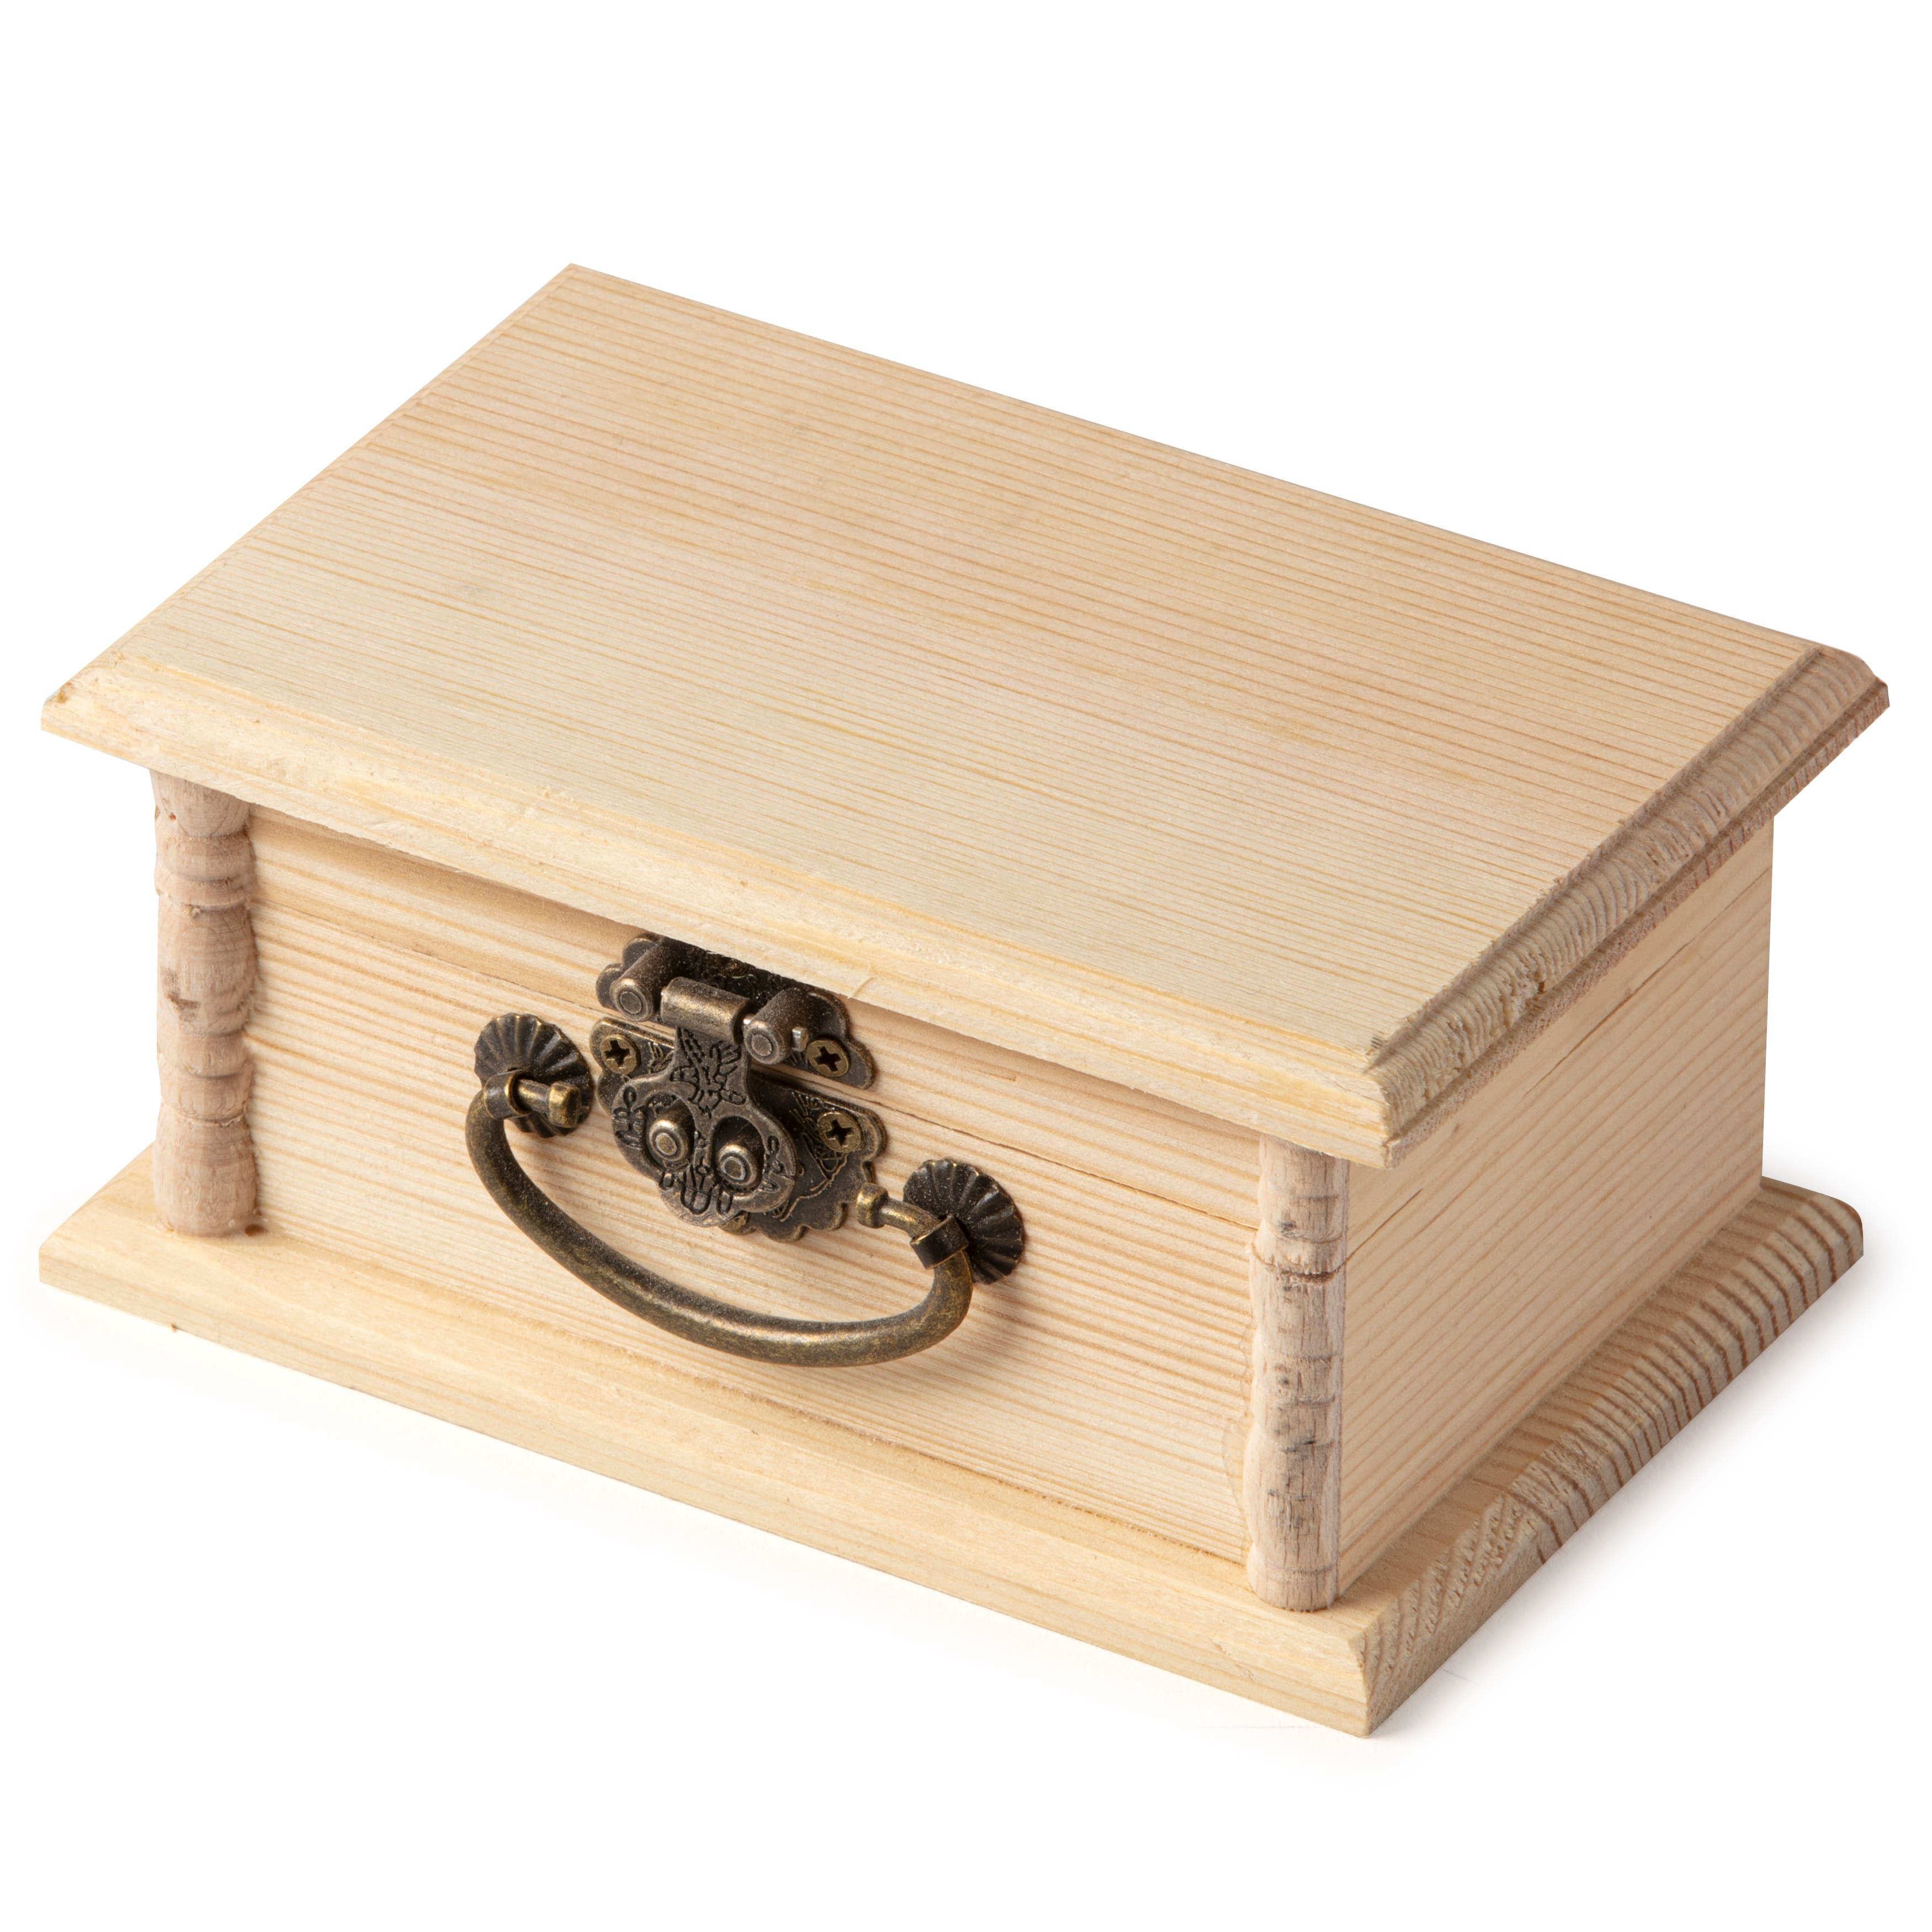 Wood Box with Handle by Make Market in Unfinished Wood | 5.25 x 3.375 x 2.5 | Michaels